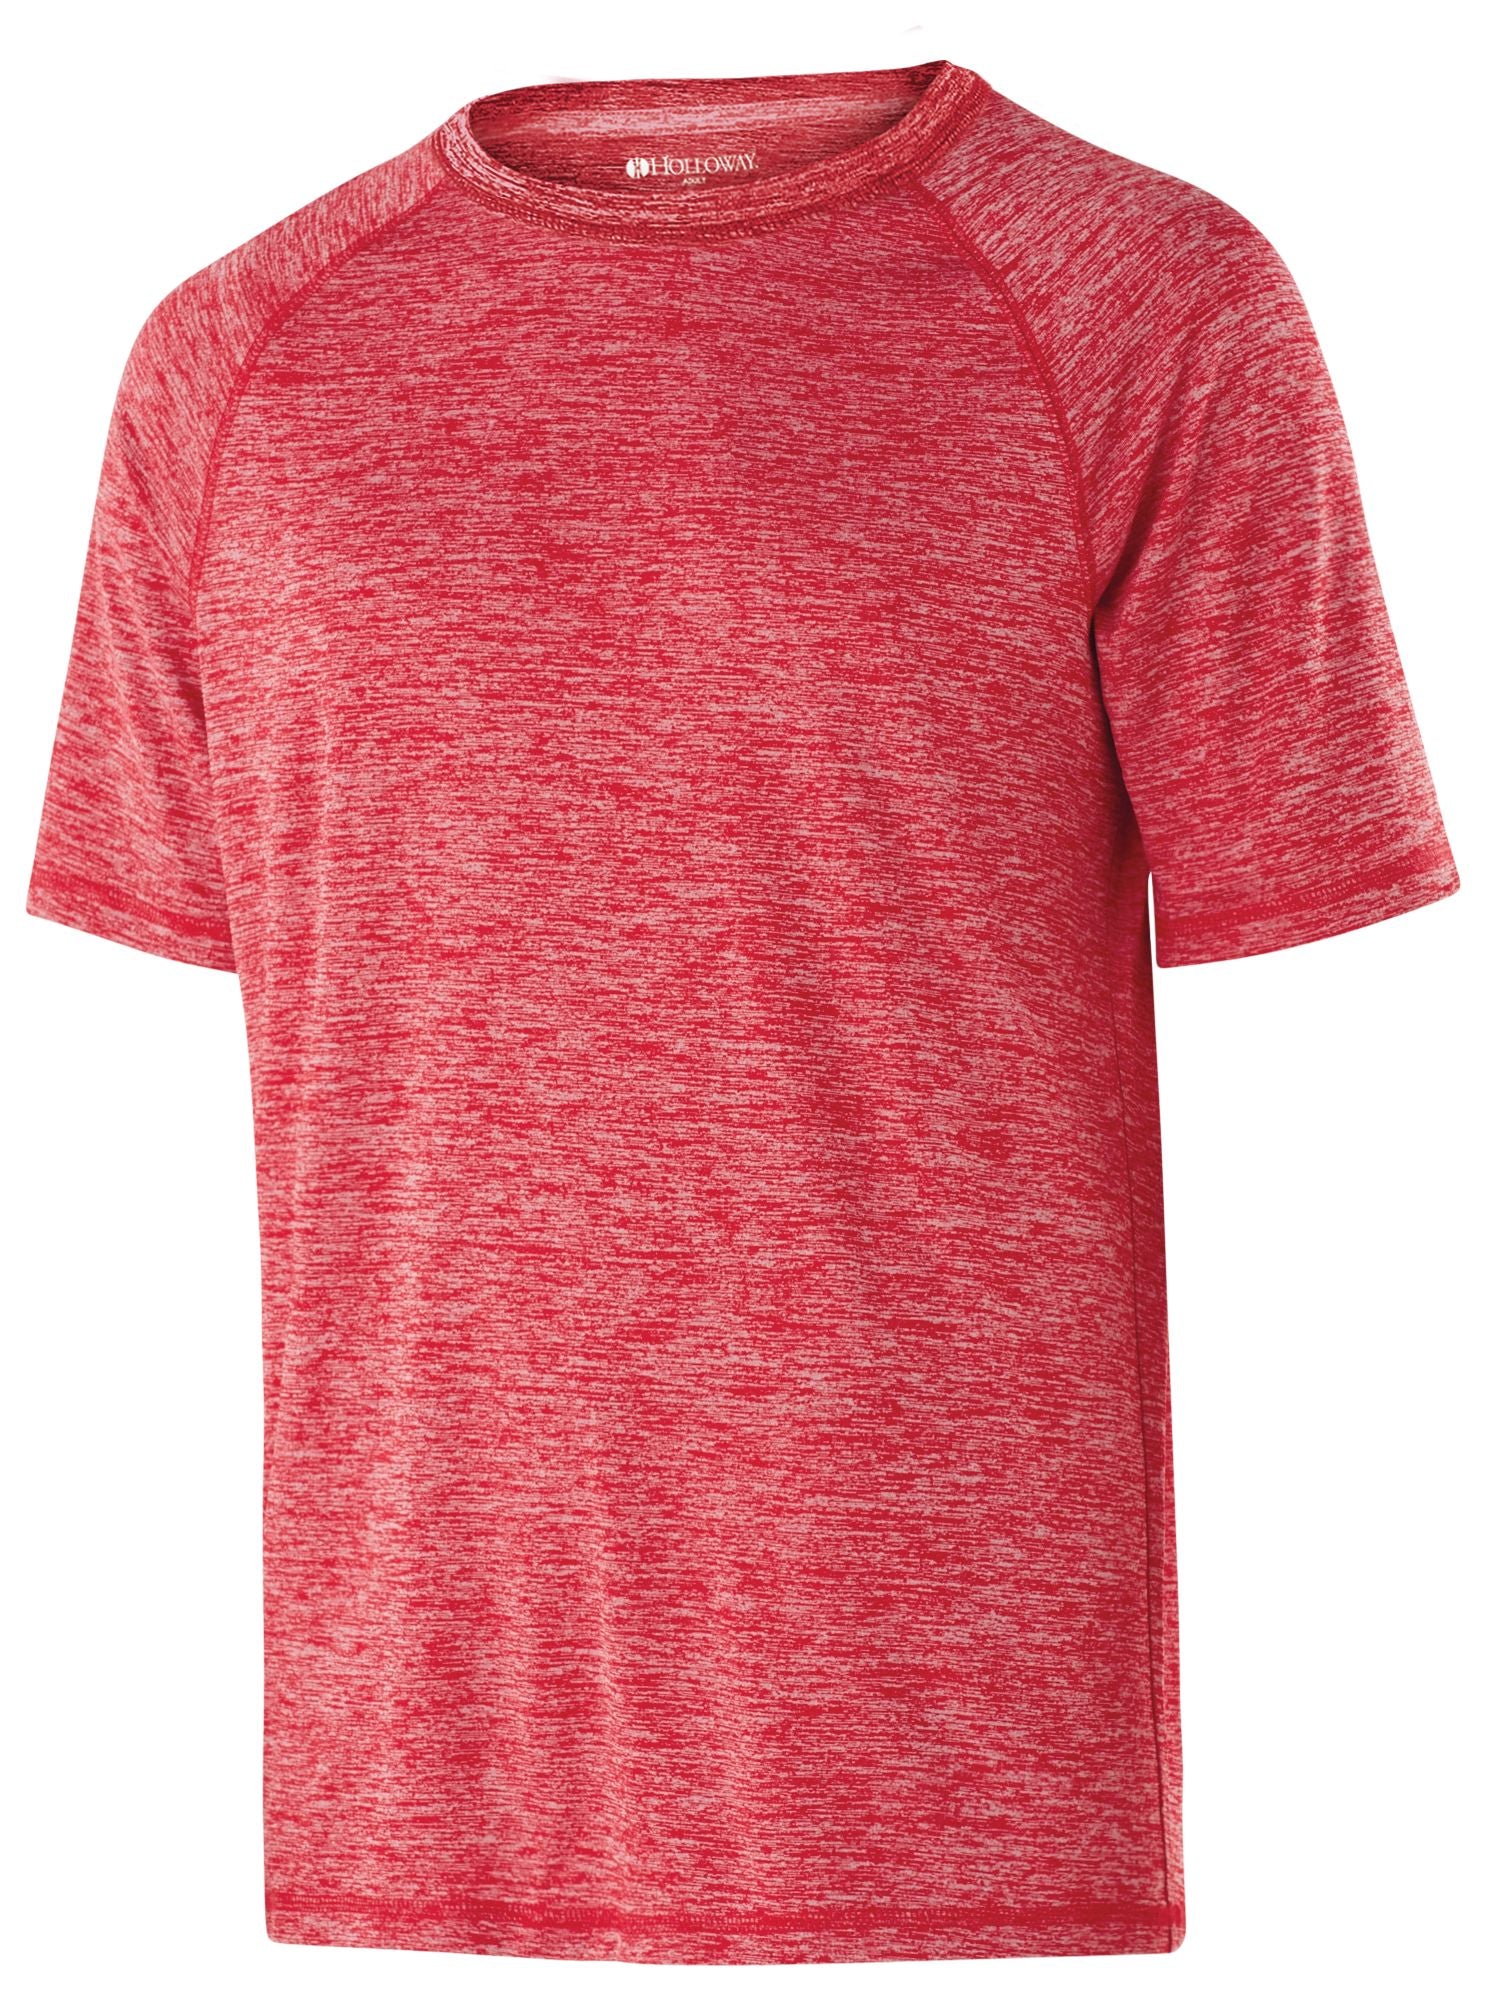 Holloway Electrify 2.0 Short Sleeve Shirt in Scarlet Heather  -Part of the Adult, Holloway, Shirts product lines at KanaleyCreations.com